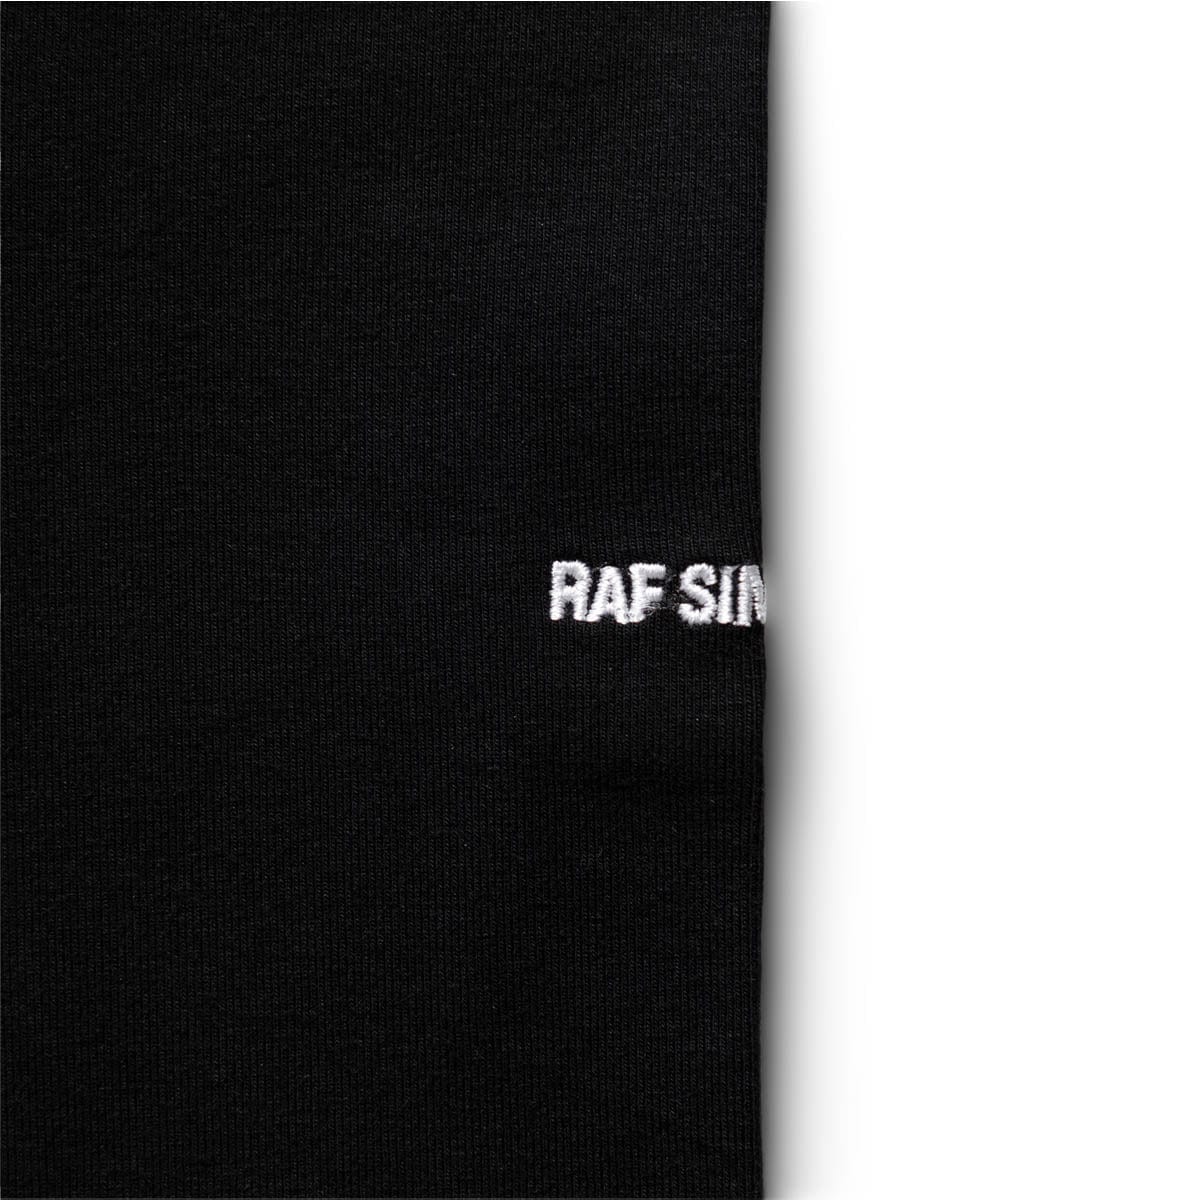 Fred Perry Shirts X RAF LAUREL DETAIL ROLL NECK TOP